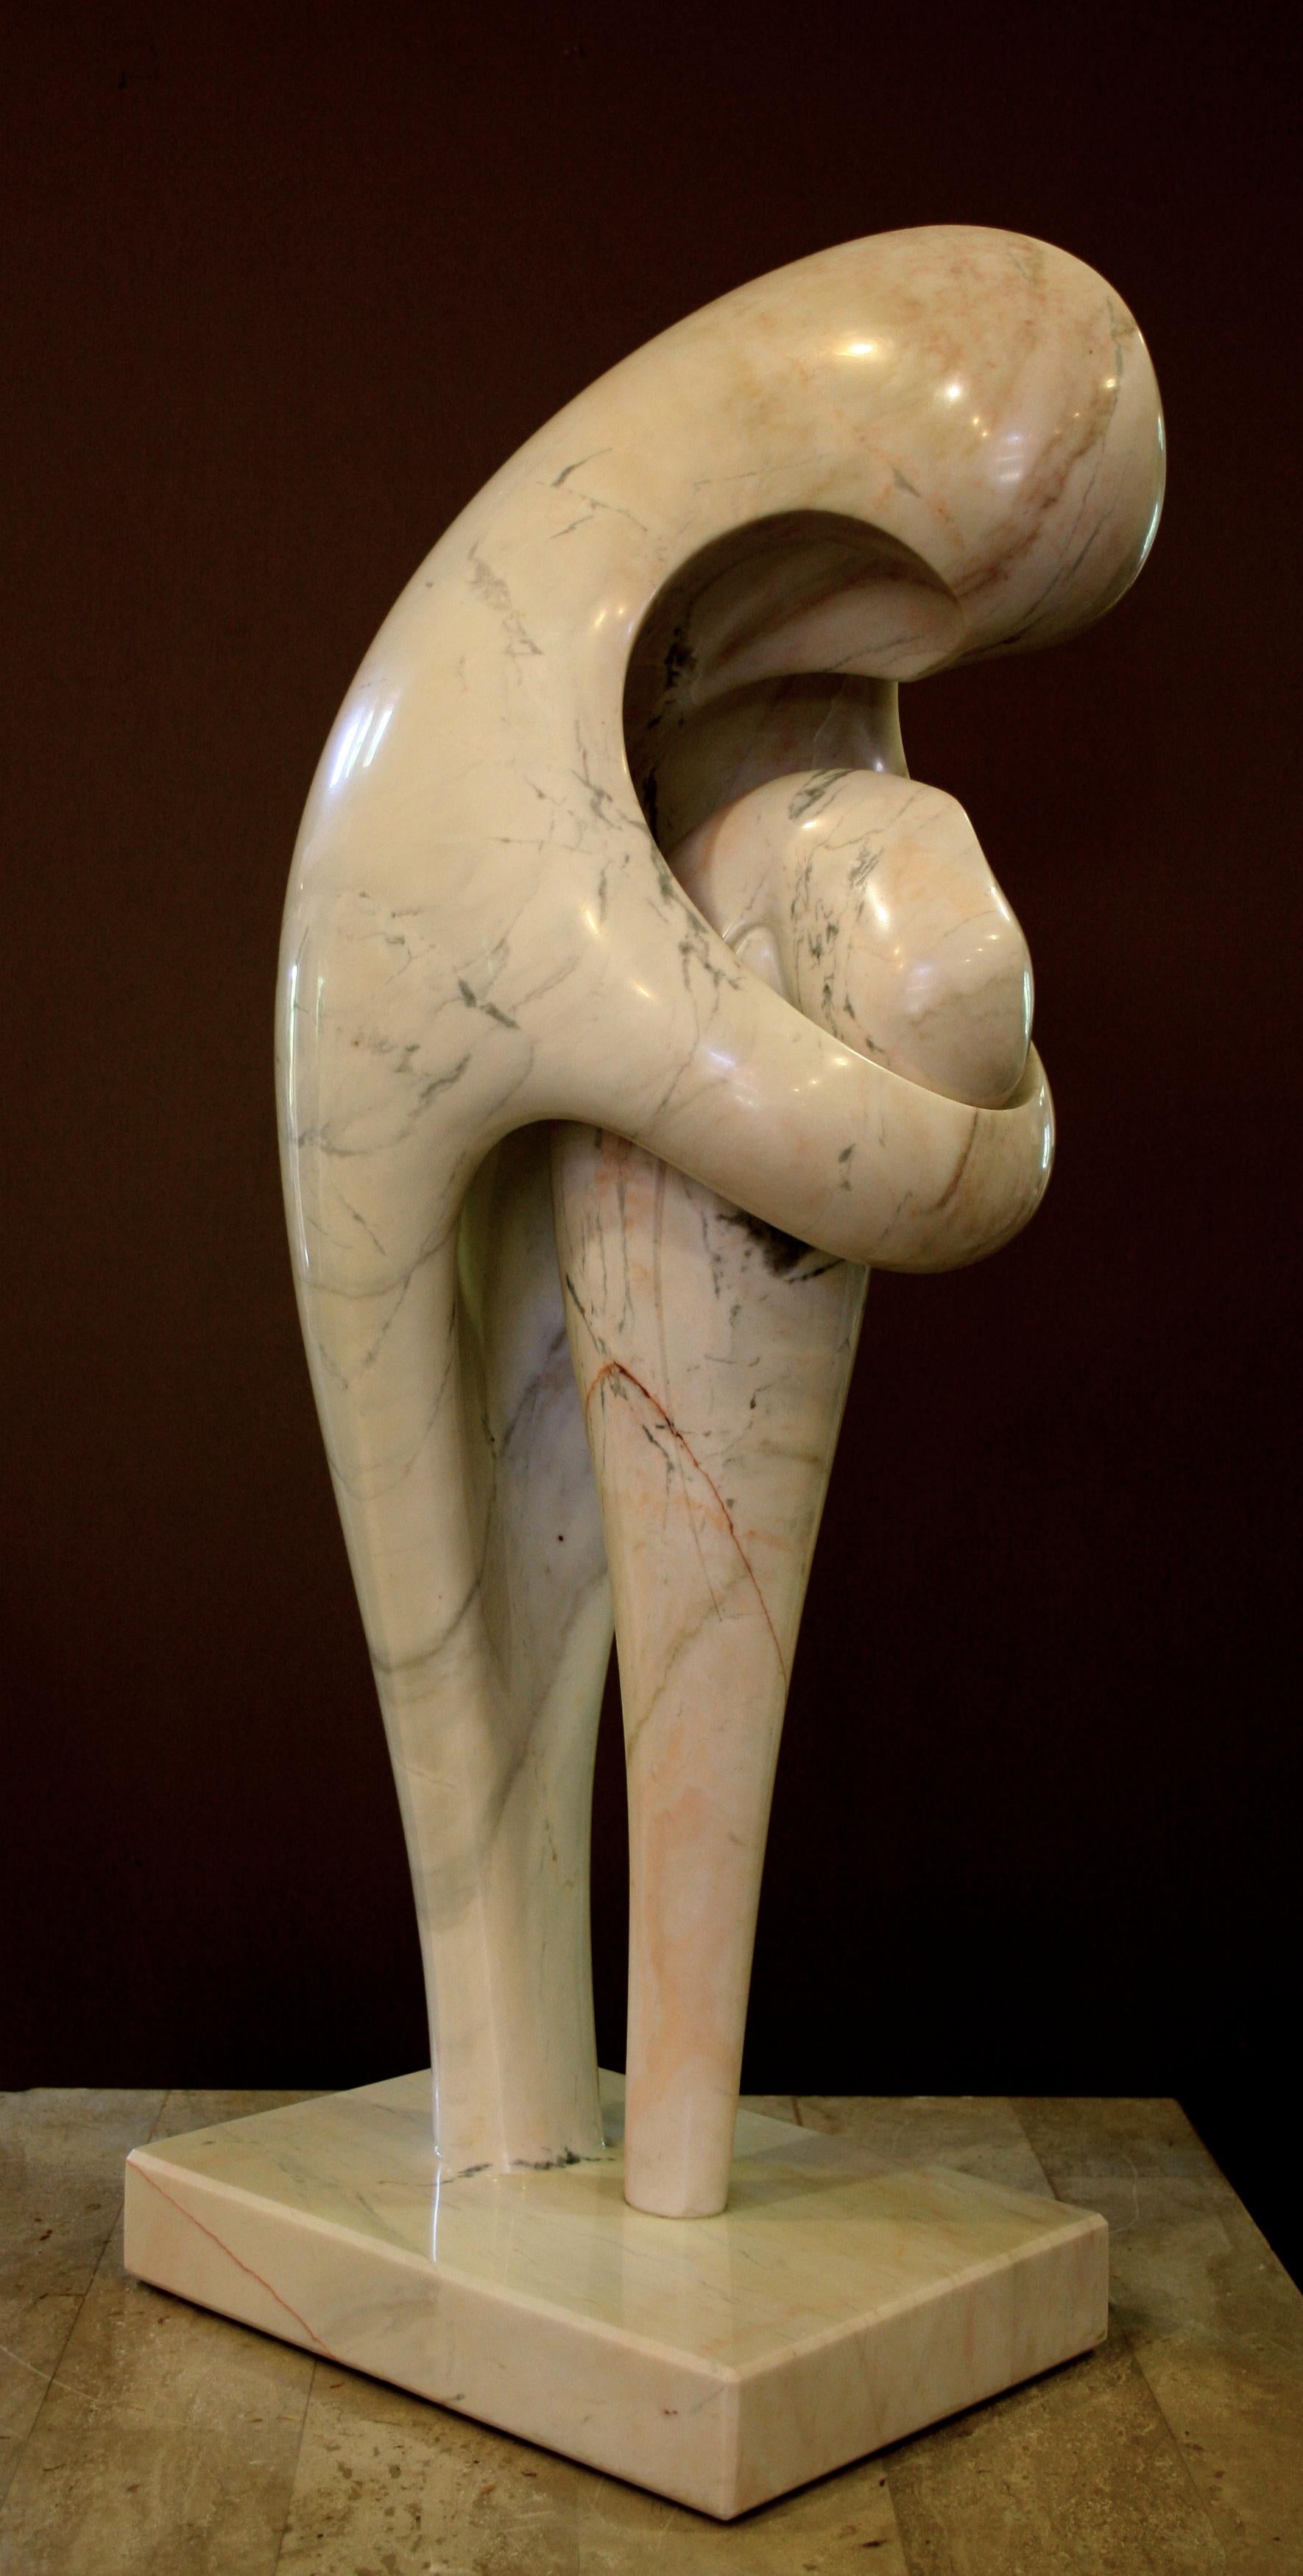 A Soul Consoled, Sculpture, by Khang Pham-New, Marble, White, Mother, Child